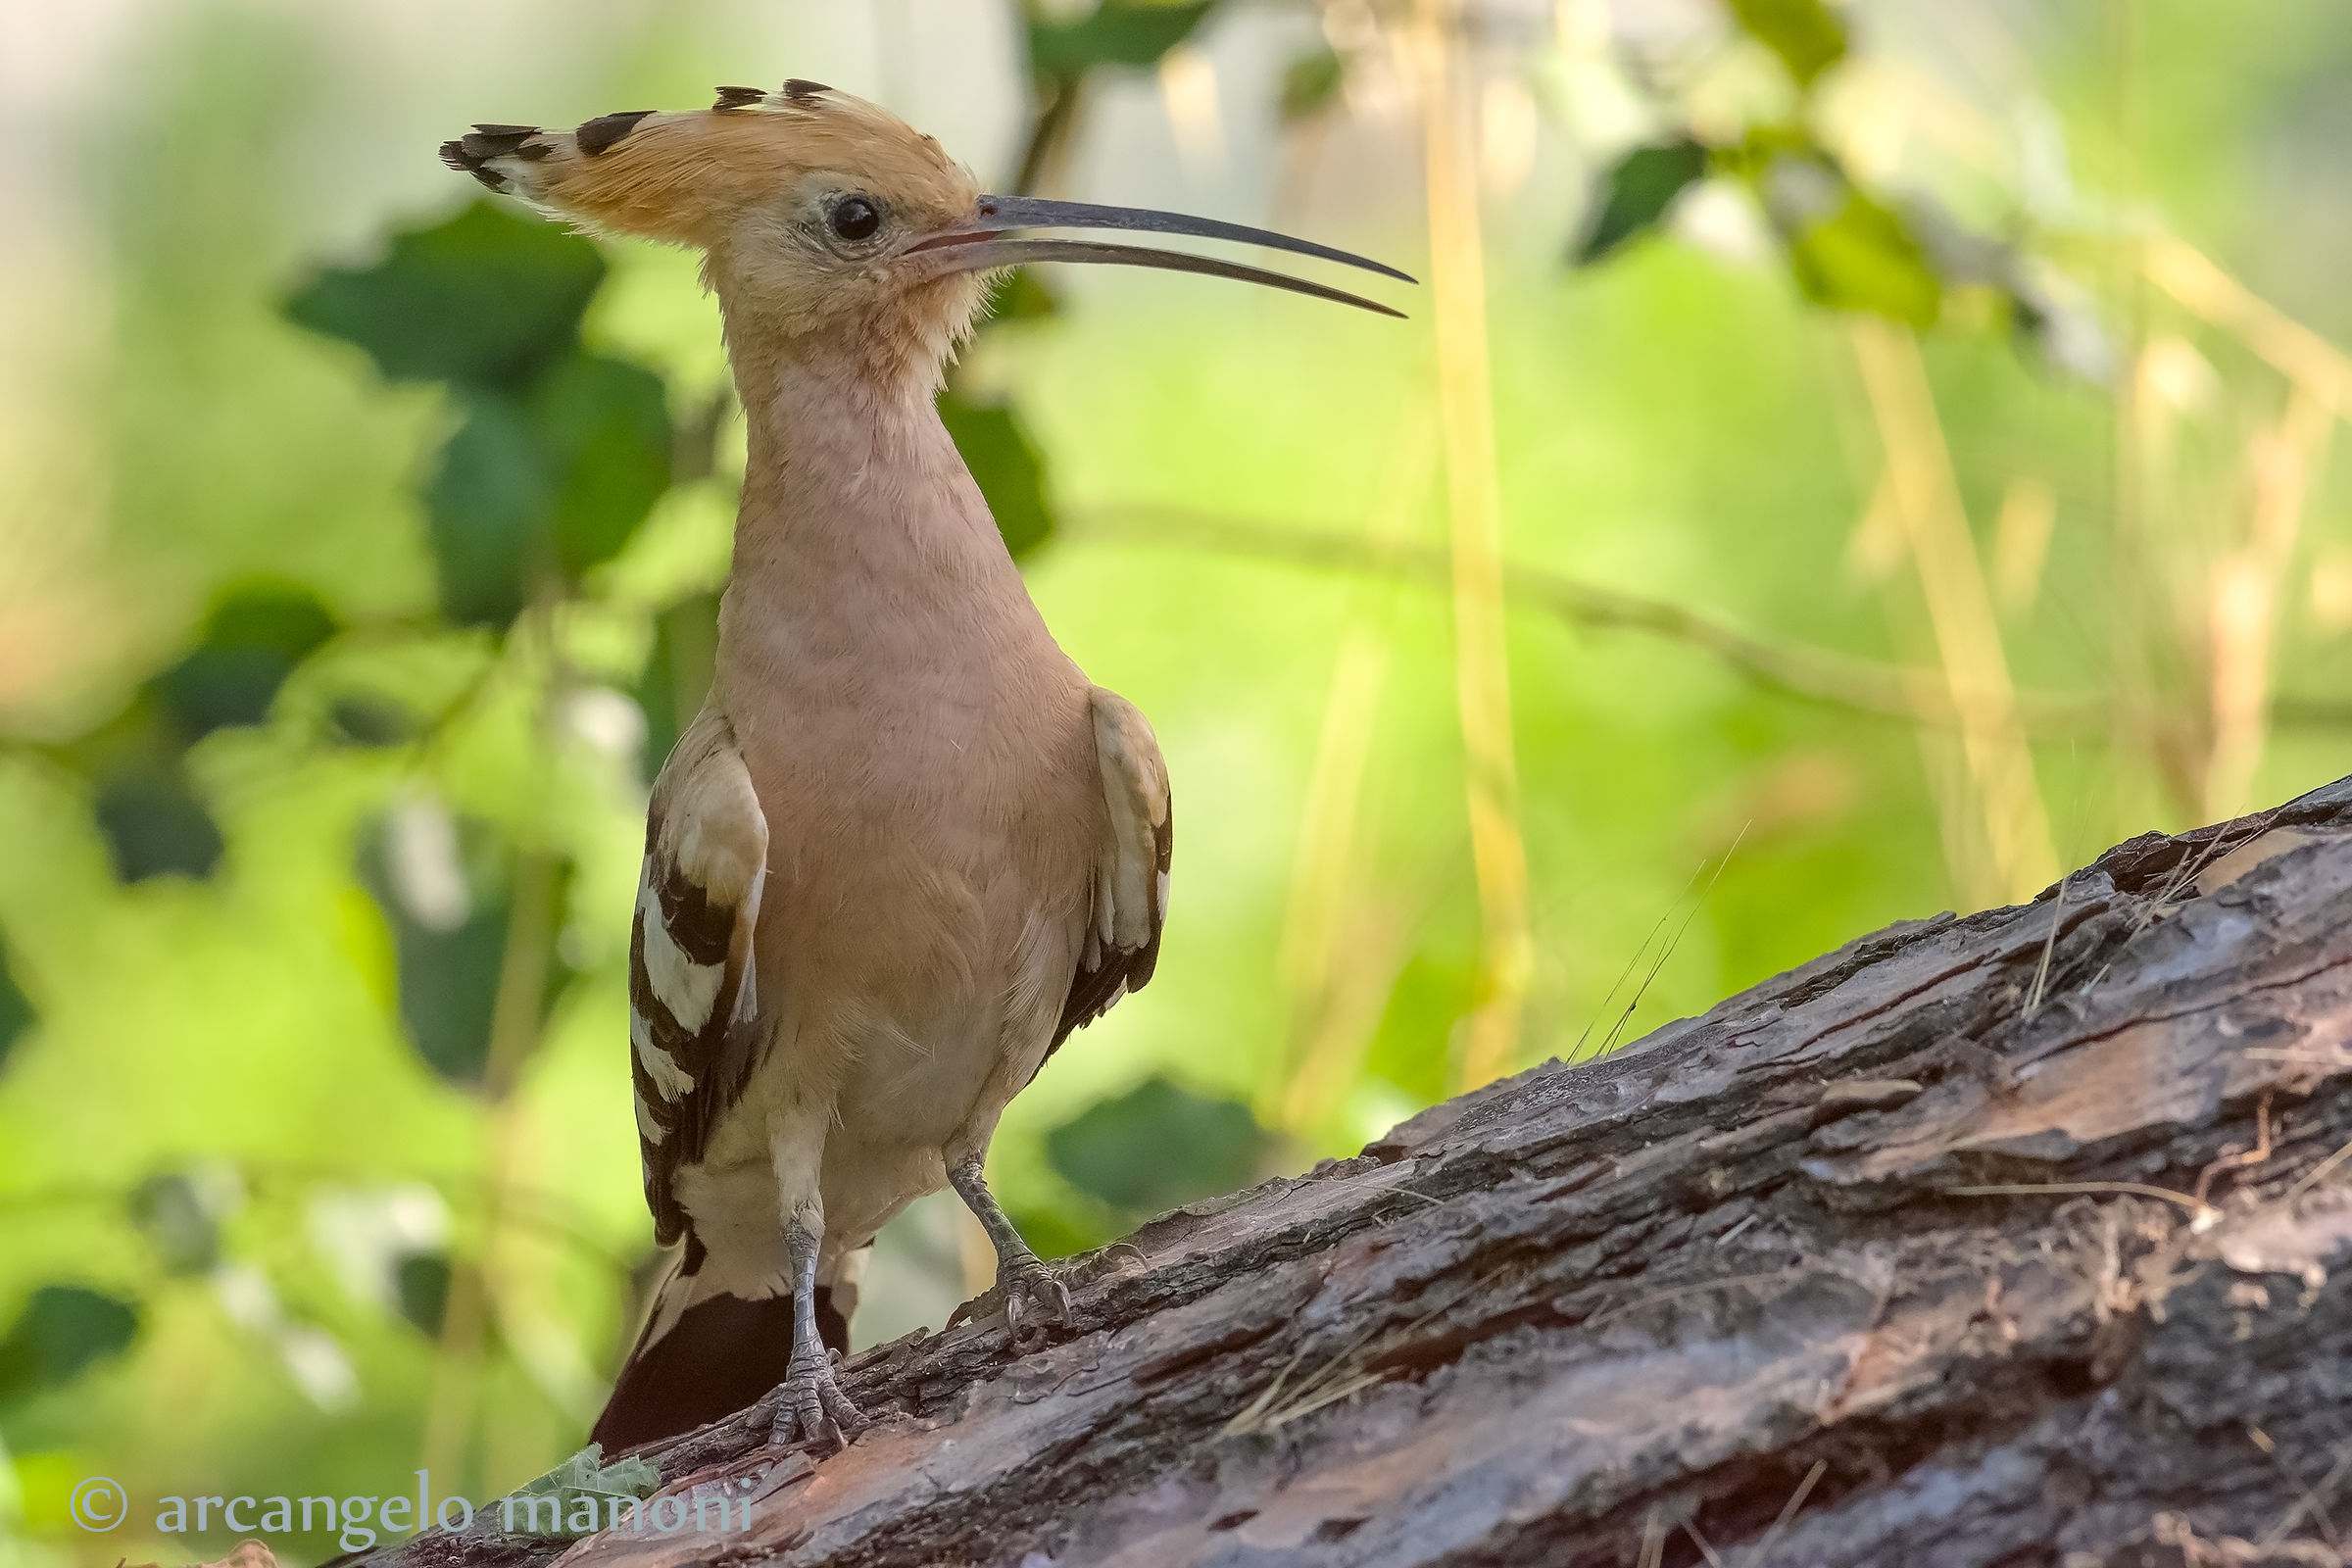 Come the hoopoe are back...